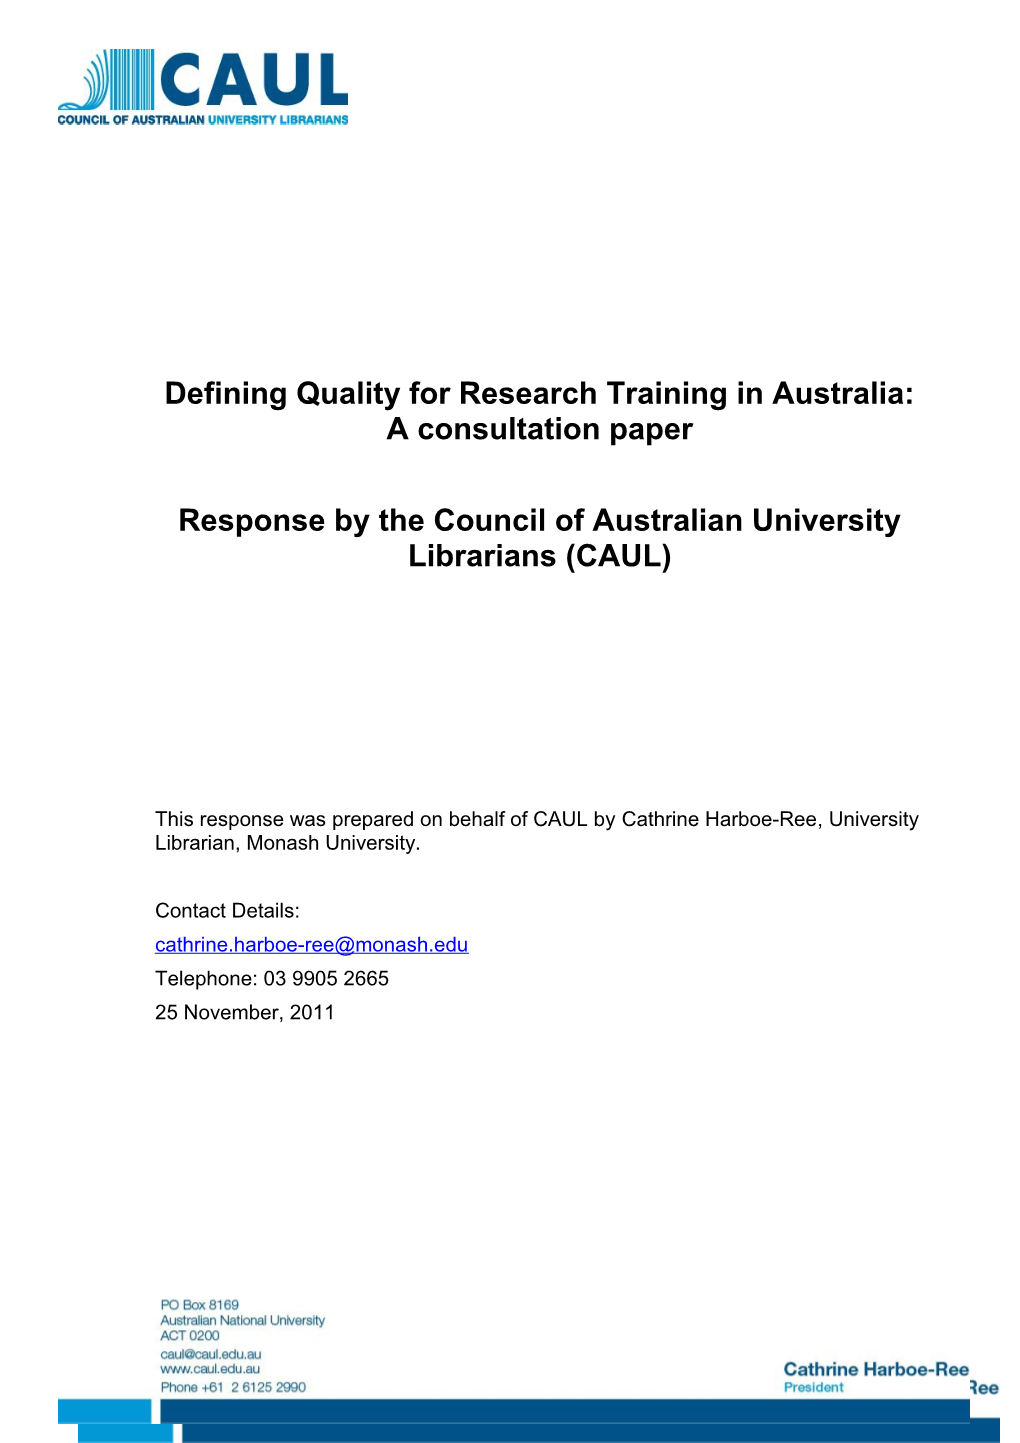 Defining Quality for Research Training in Australia: a Consultation Paper